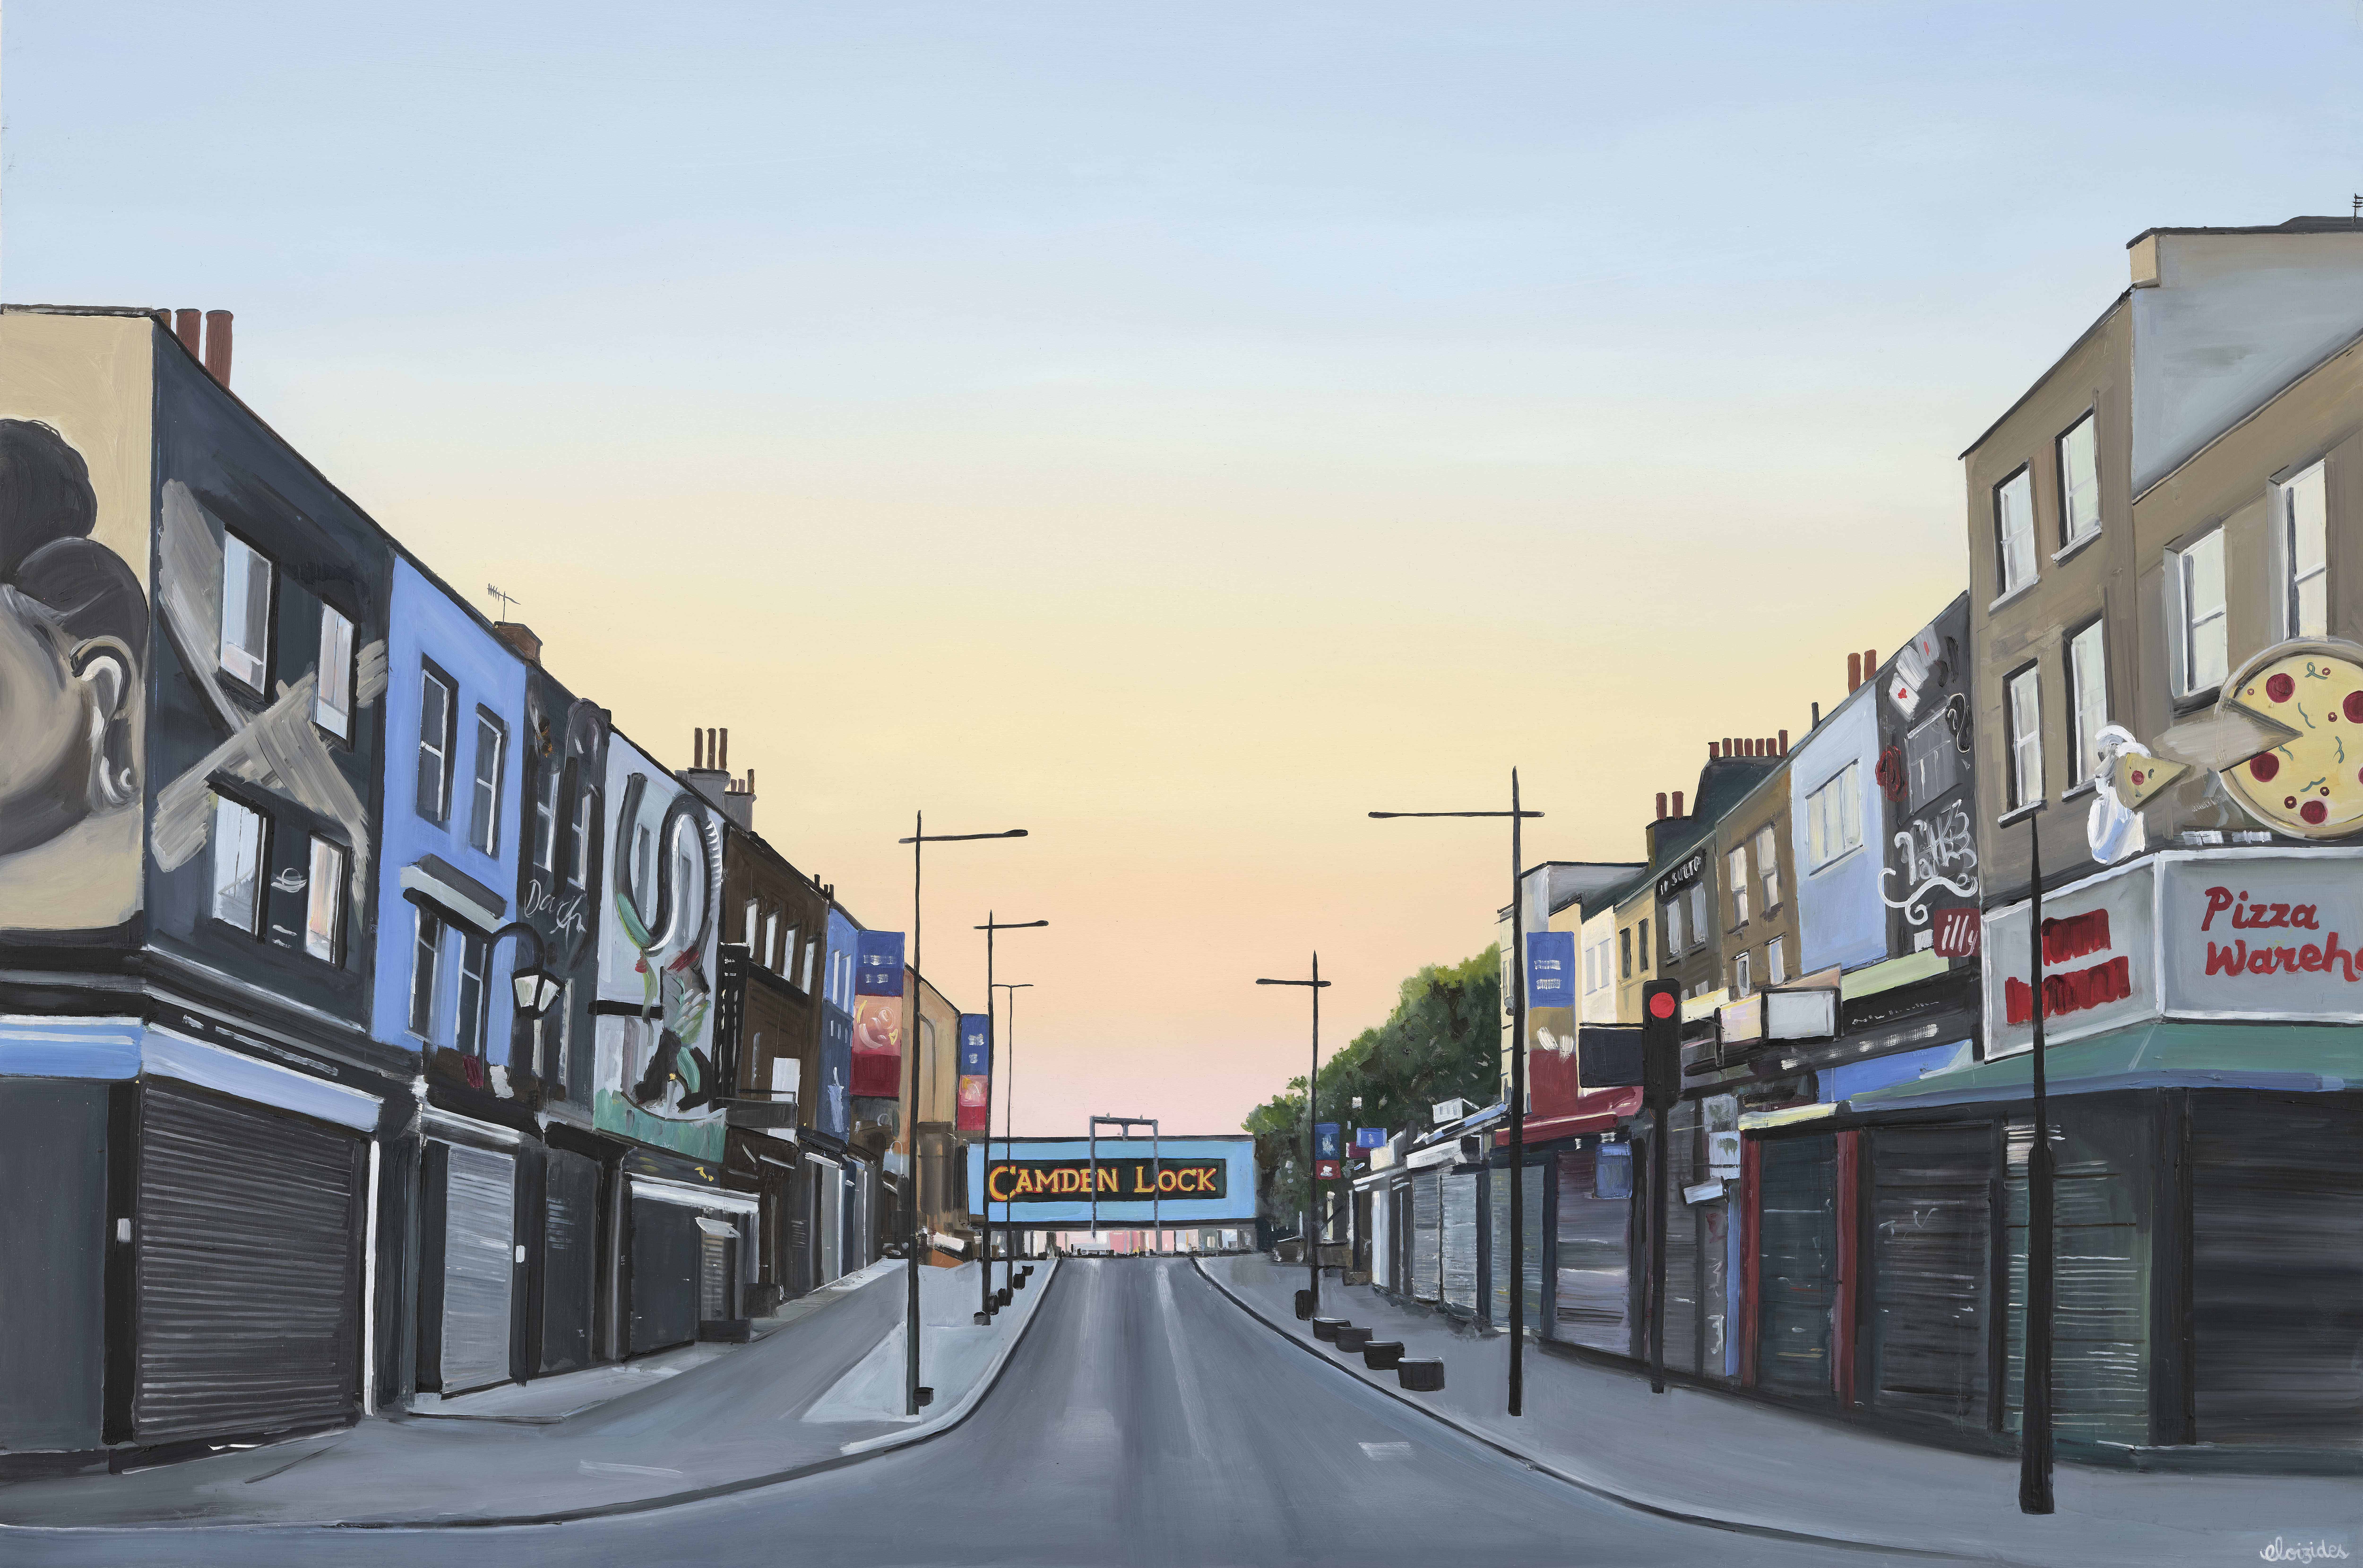 Painting of Camden Town